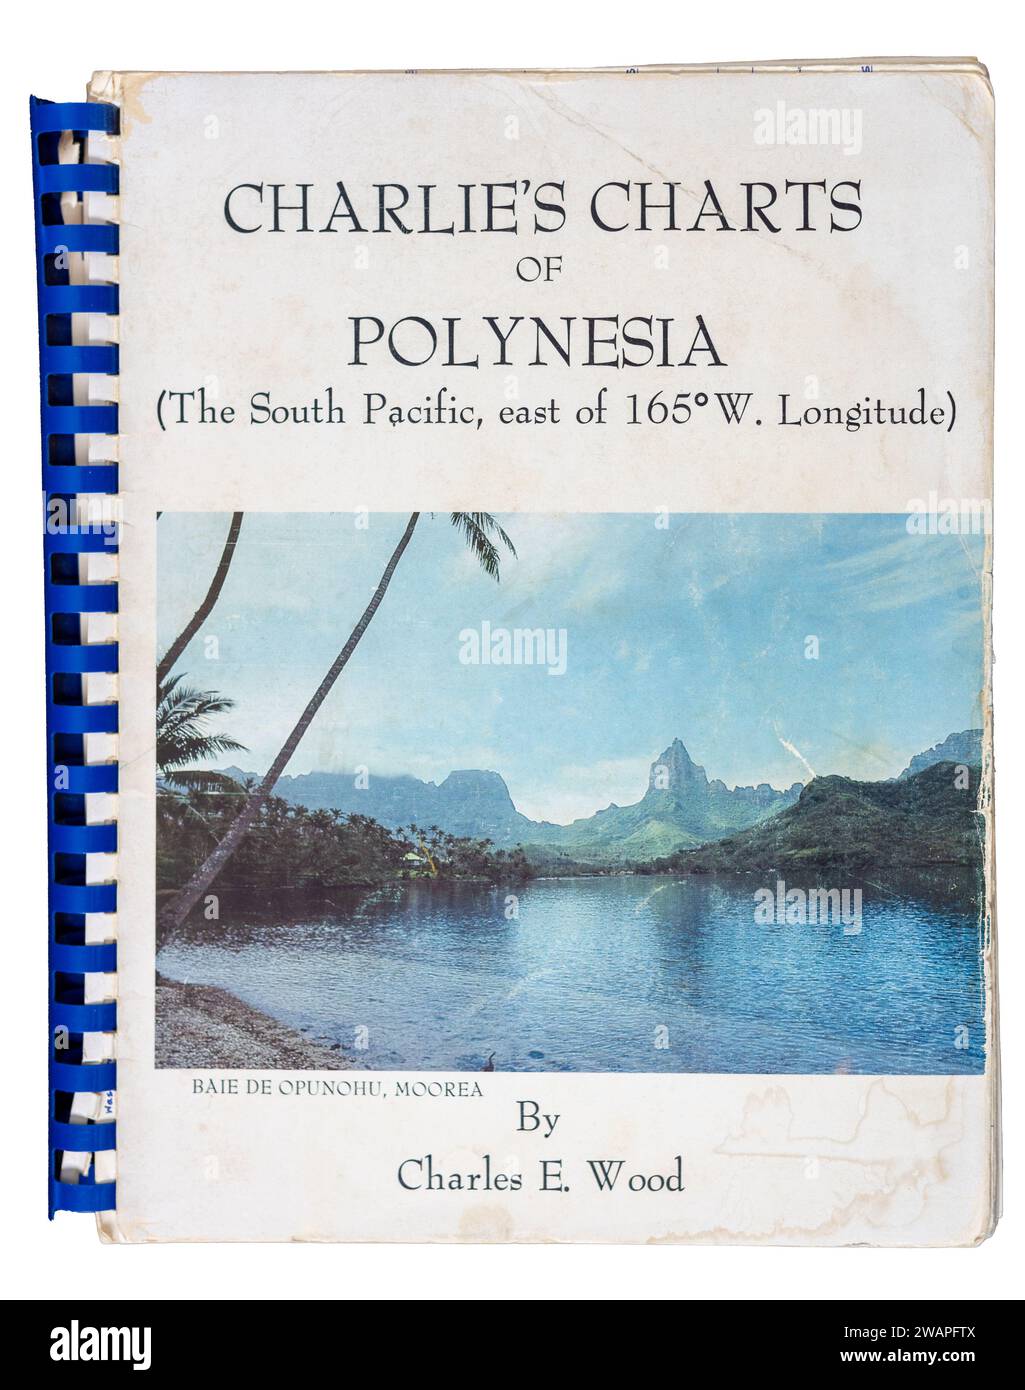 Well used copy of Charlie's Charts of Polynesia, a book with navigation charts and sailing directions for sailors cruising in the South Pacific. Stock Photo